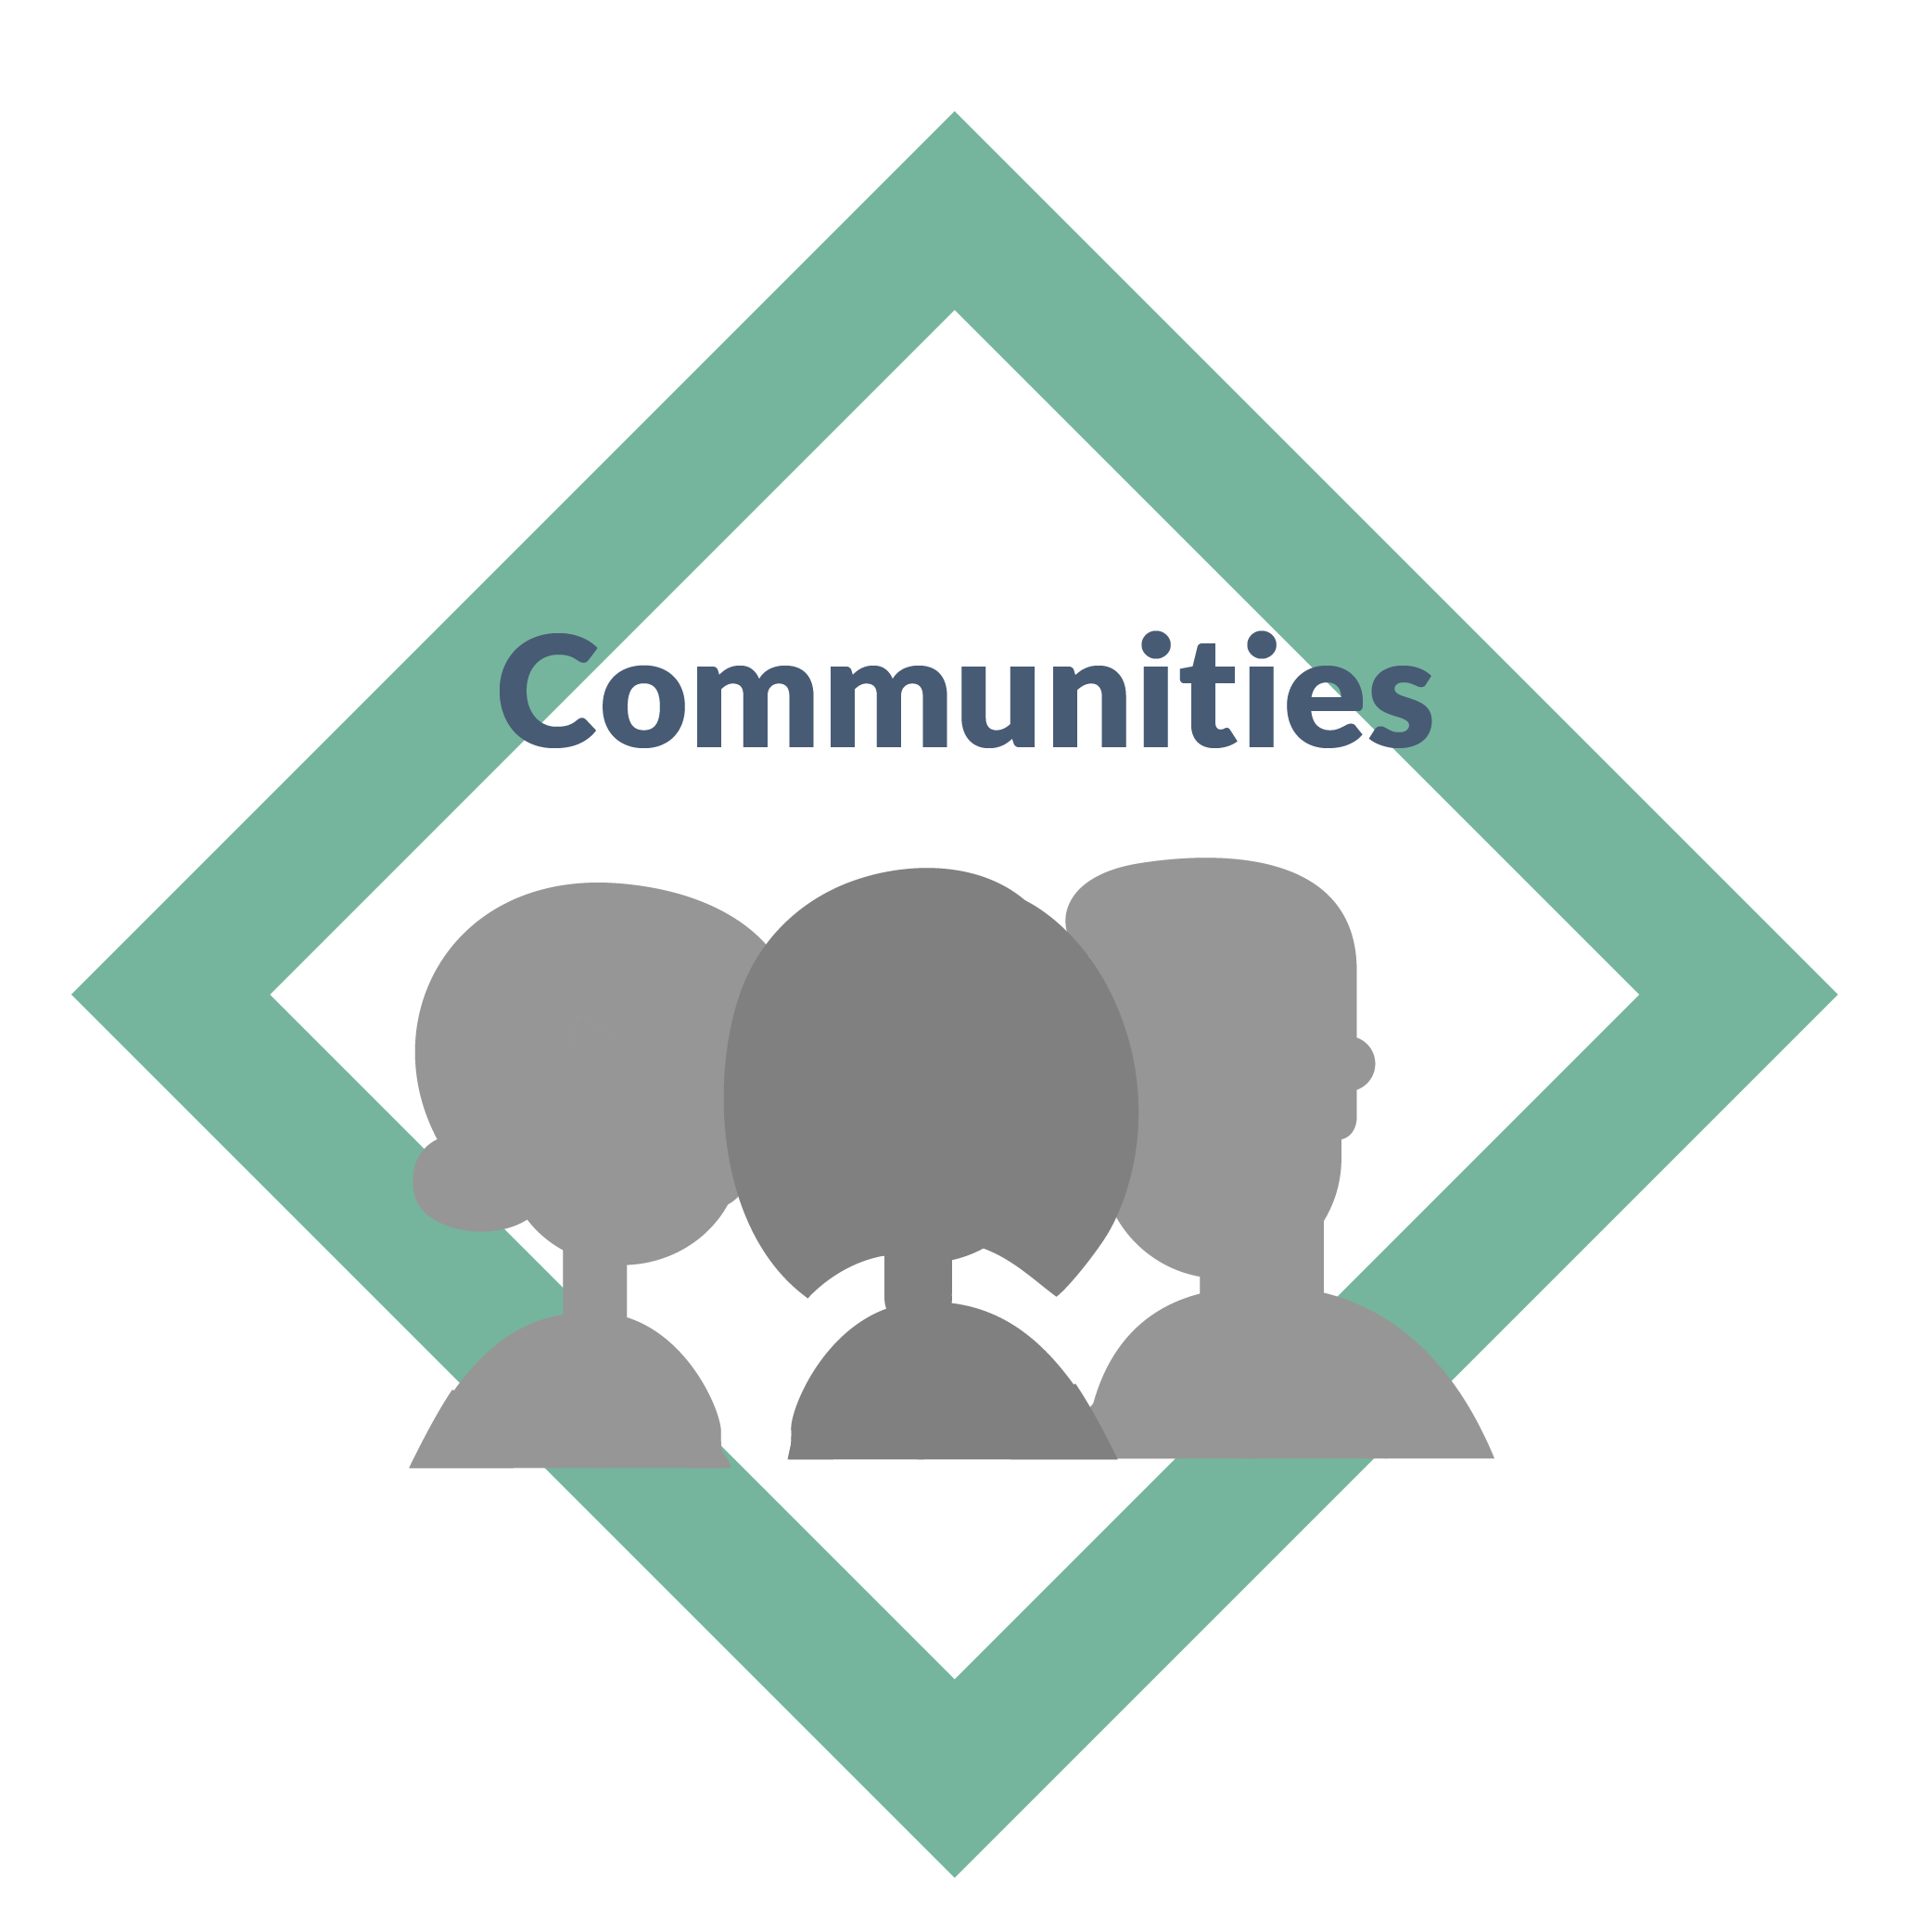 Communities - learning together